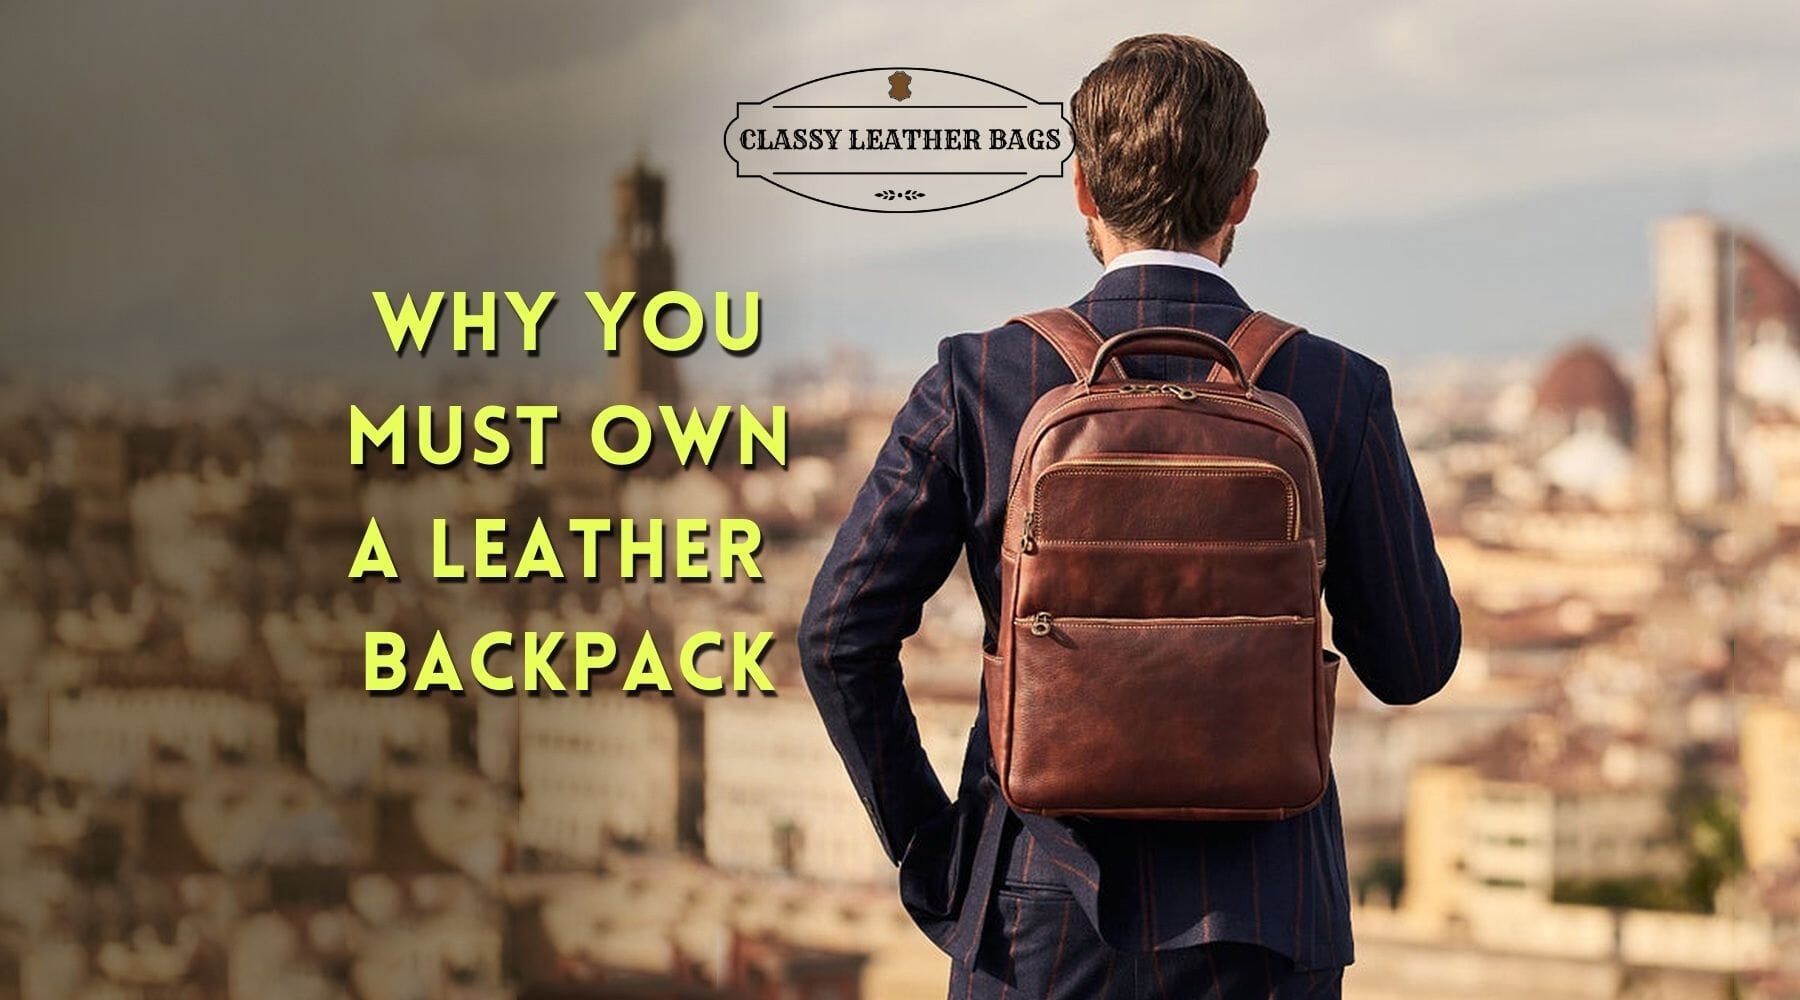 Why You Must Own a Leather Backpack?